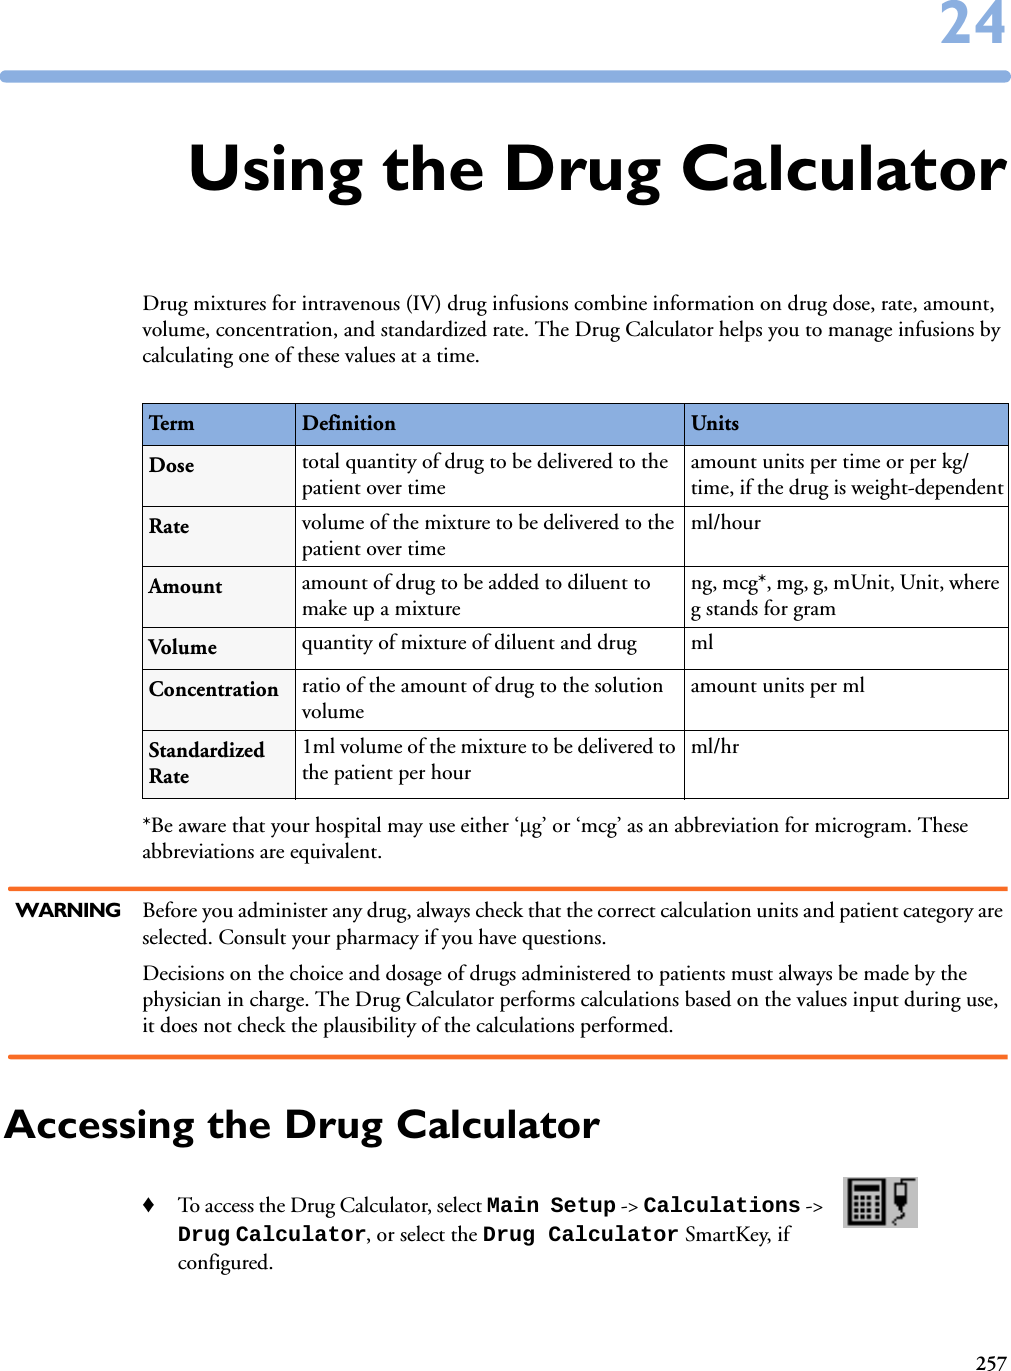 2572424Using the Drug CalculatorDrug mixtures for intravenous (IV) drug infusions combine information on drug dose, rate, amount, volume, concentration, and standardized rate. The Drug Calculator helps you to manage infusions by calculating one of these values at a time. *Be aware that your hospital may use either ‘g’ or ‘mcg’ as an abbreviation for microgram. These abbreviations are equivalent.WARNING Before you administer any drug, always check that the correct calculation units and patient category are selected. Consult your pharmacy if you have questions.Decisions on the choice and dosage of drugs administered to patients must always be made by the physician in charge. The Drug Calculator performs calculations based on the values input during use, it does not check the plausibility of the calculations performed.Accessing the Drug Calculator♦To access the Drug Calculator, select Main Setup -&gt; Calculations -&gt; Drug Calculator, or select the Drug Calculator SmartKey, if configured. Term Definition UnitsDose total quantity of drug to be delivered to the patient over timeamount units per time or per kg/time, if the drug is weight-dependentRate volume of the mixture to be delivered to the patient over time ml/hourAmount amount of drug to be added to diluent to make up a mixtureng, mcg*, mg, g, mUnit, Unit, where g stands for gram Volume quantity of mixture of diluent and drug  mlConcentration ratio of the amount of drug to the solution volume amount units per mlStandardized Rate1ml volume of the mixture to be delivered to the patient per hourml/hr